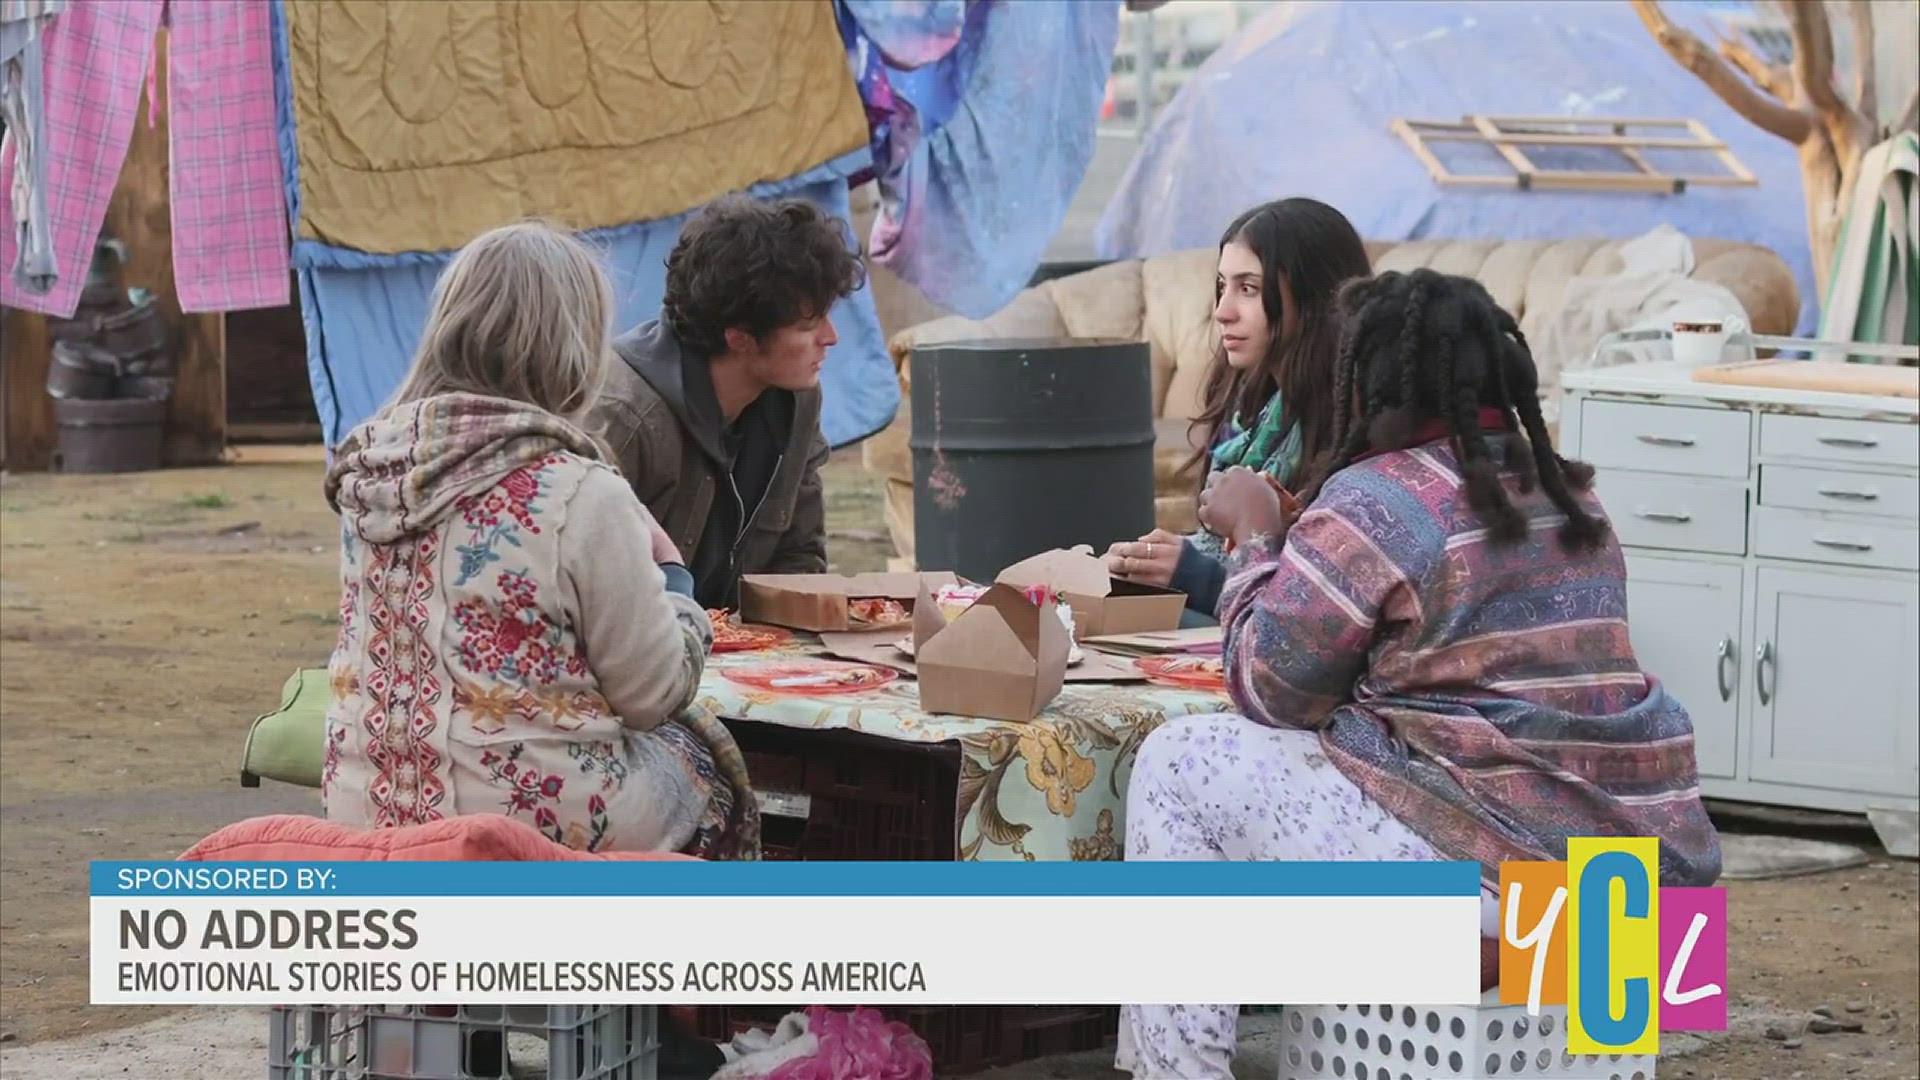 'No Address' filmed in Sacramento, focuses on the unhoused community. We hear from the actors about their roles in the film and thoughts on the topic.